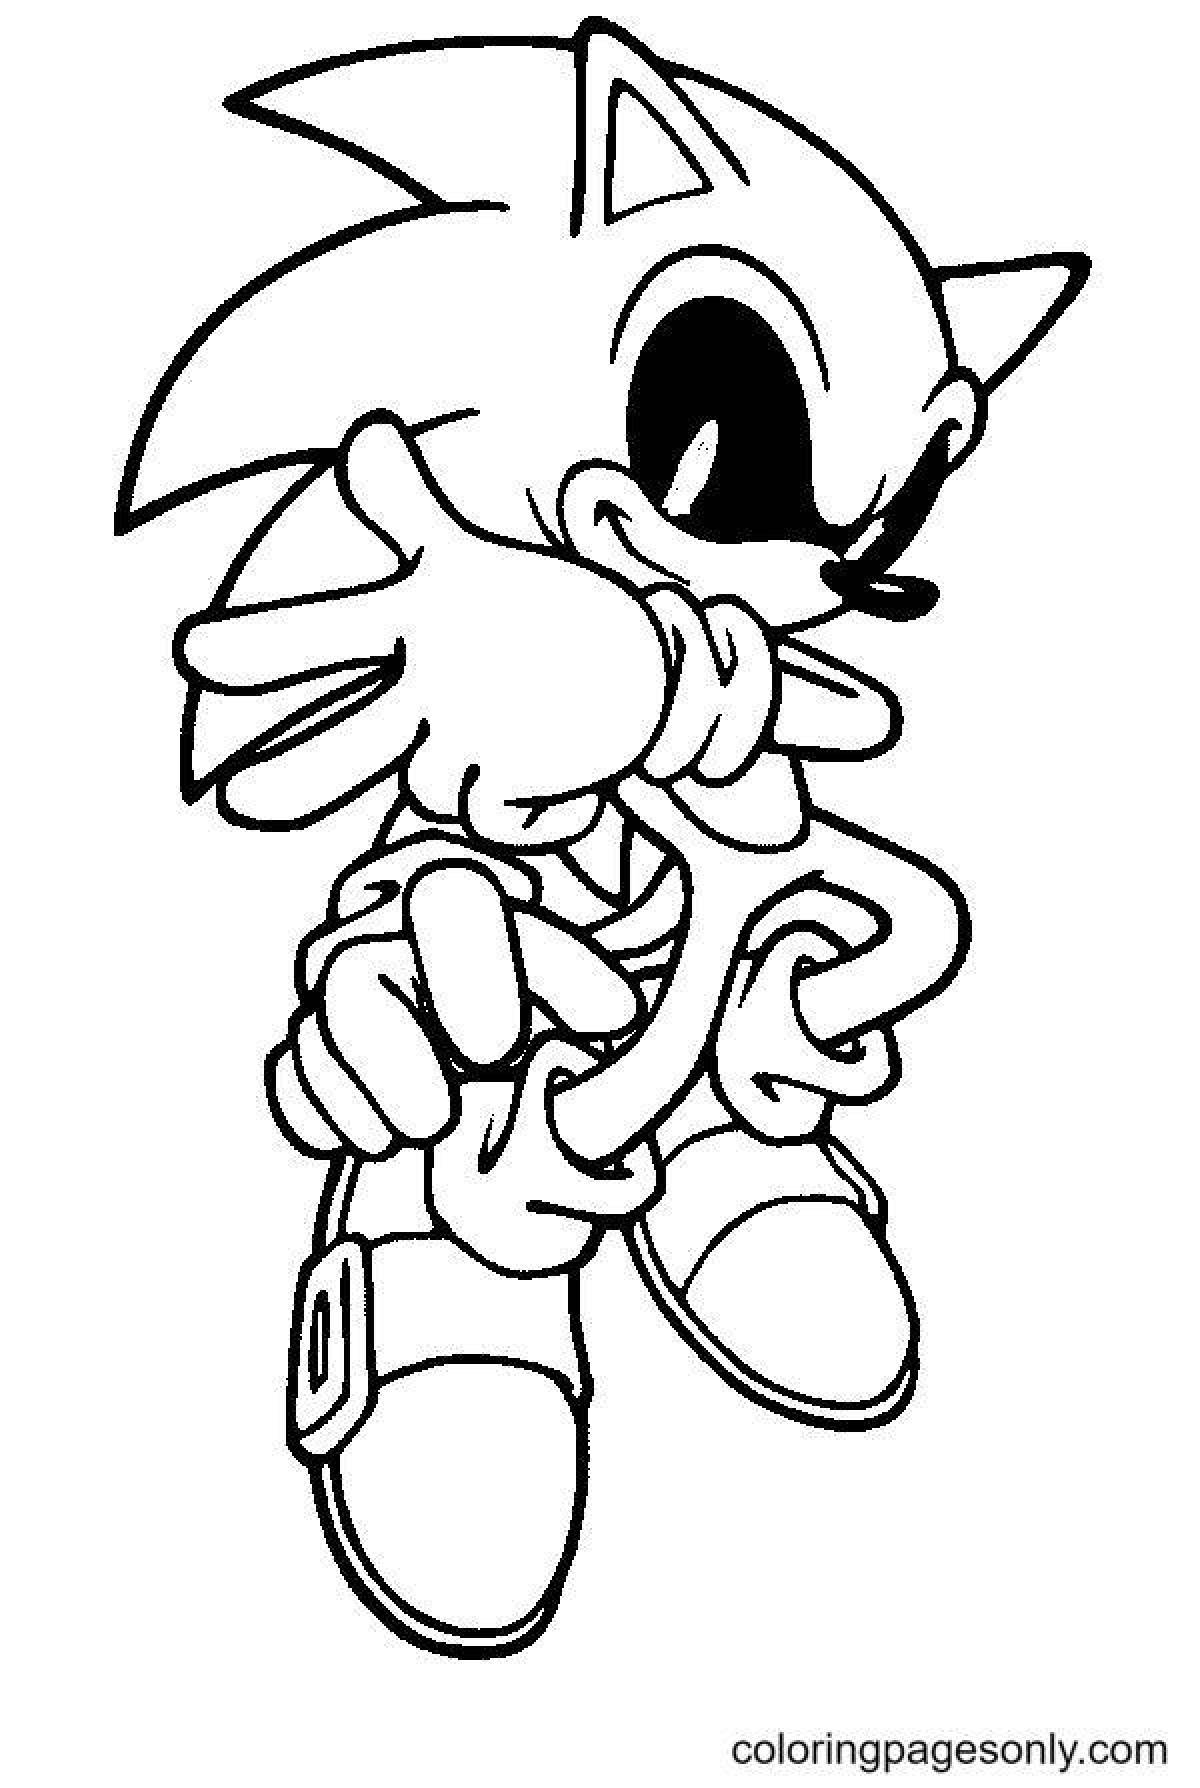 Intriguing sonic xz coloring book